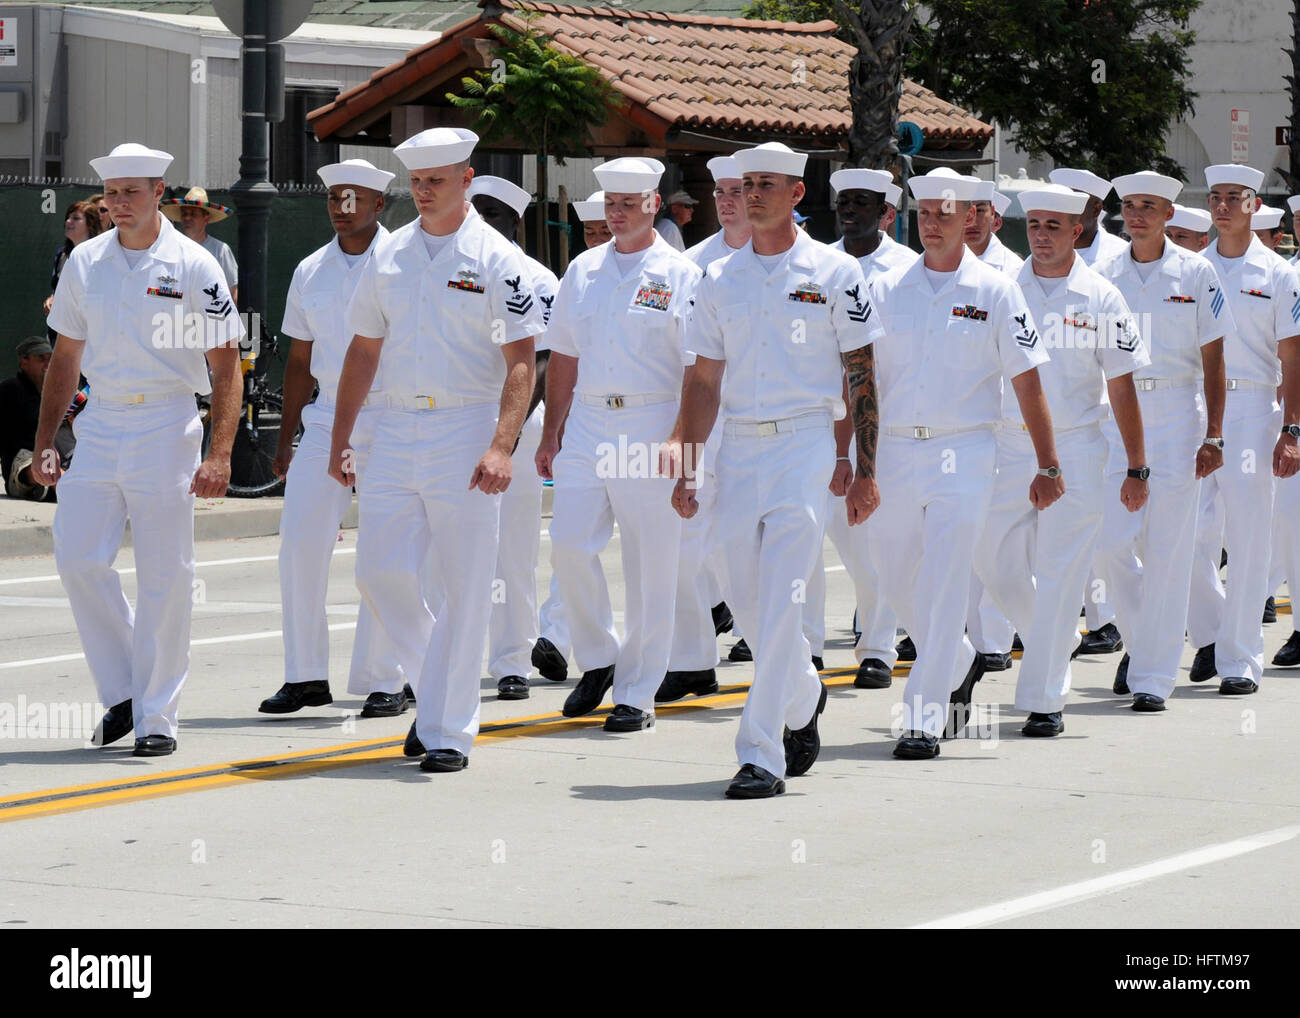 080801-N-8547M-017 SANTA BARBARA, Calif. (Aug. 1, 2008) Seabees from Naval Mobile Construction Battalion (NMCB) 5 march in a fiesta day parade representing the 100th anniversary of the Great White Fleet. NMCB-5 is engaged in an aggressive homeport training cycle in preparation for the upcoming Iraq deployment. (U.S. U.S. Navy photo by Mass Communication Specialist 3rd Class Patrick W. Mullen III/Released) US Navy 080801-N-8547M-017 eabees from Naval Mobile Construction Battalion (NMCB) 5 march in a fiesta day parade representing the 100th anniversary of the Great White Fleet Stock Photo